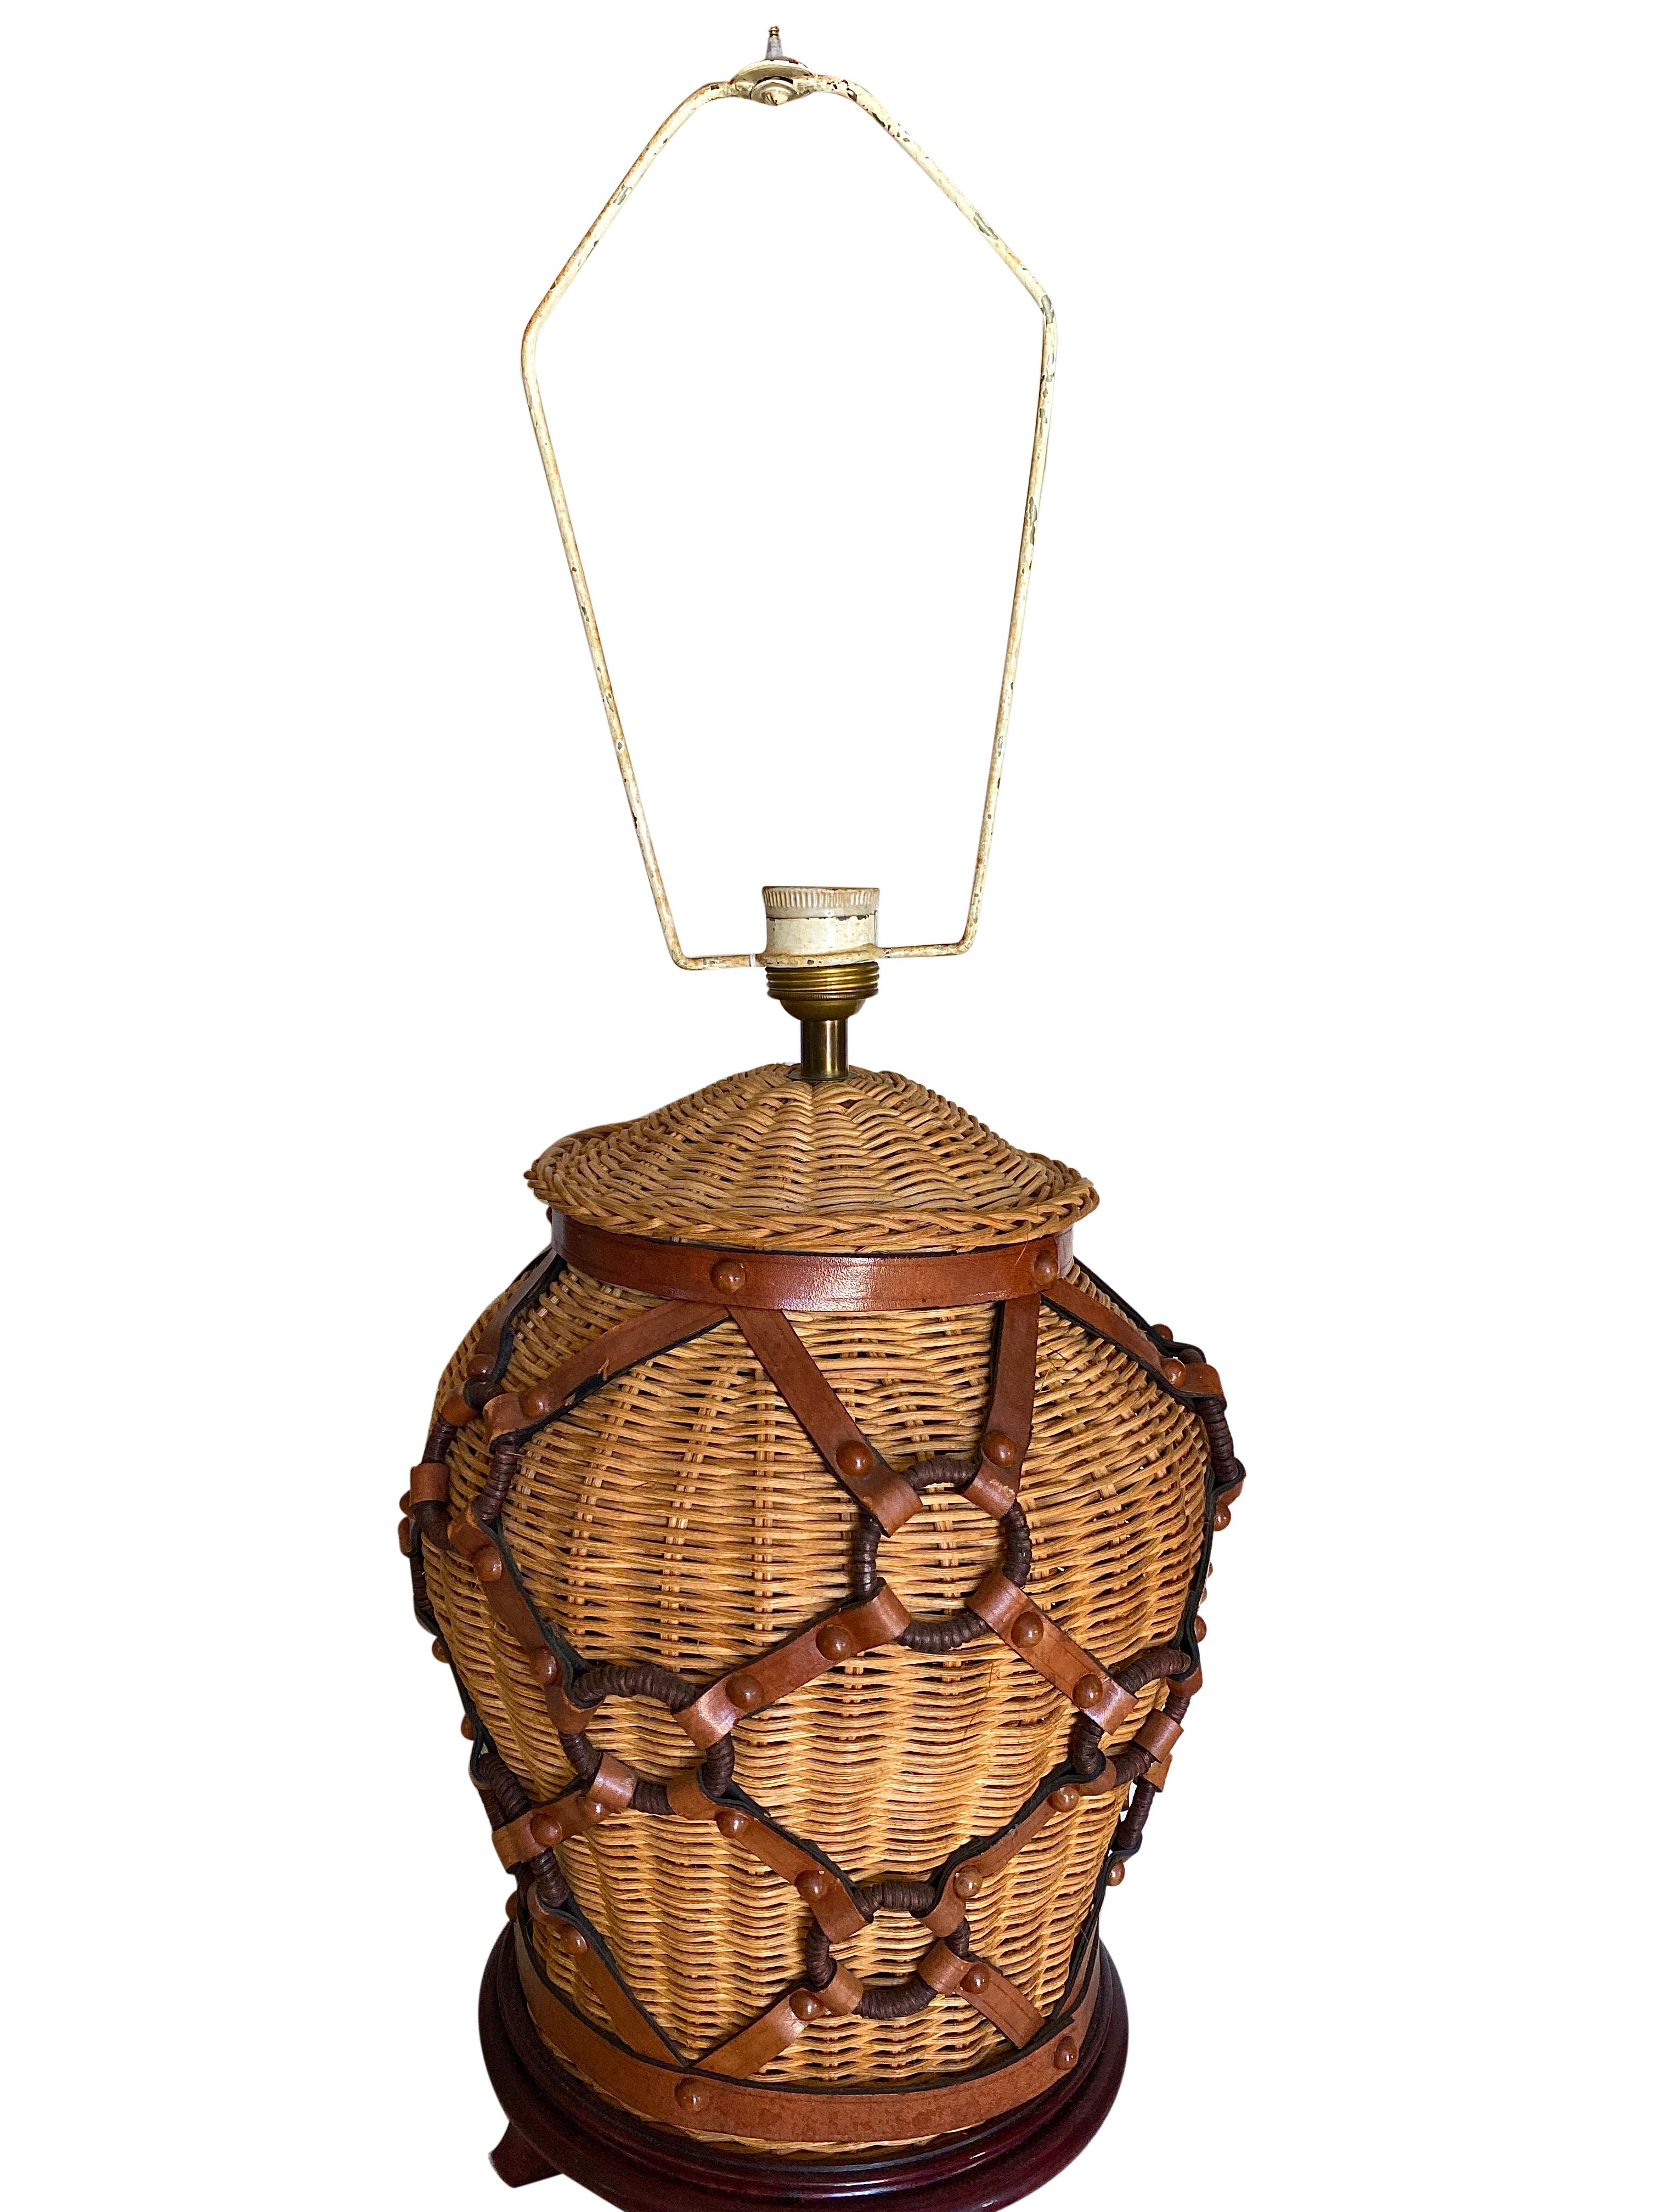 Vintage wicker table lamp with leather strapping and matching wicker lamp shade.

Measures: 25